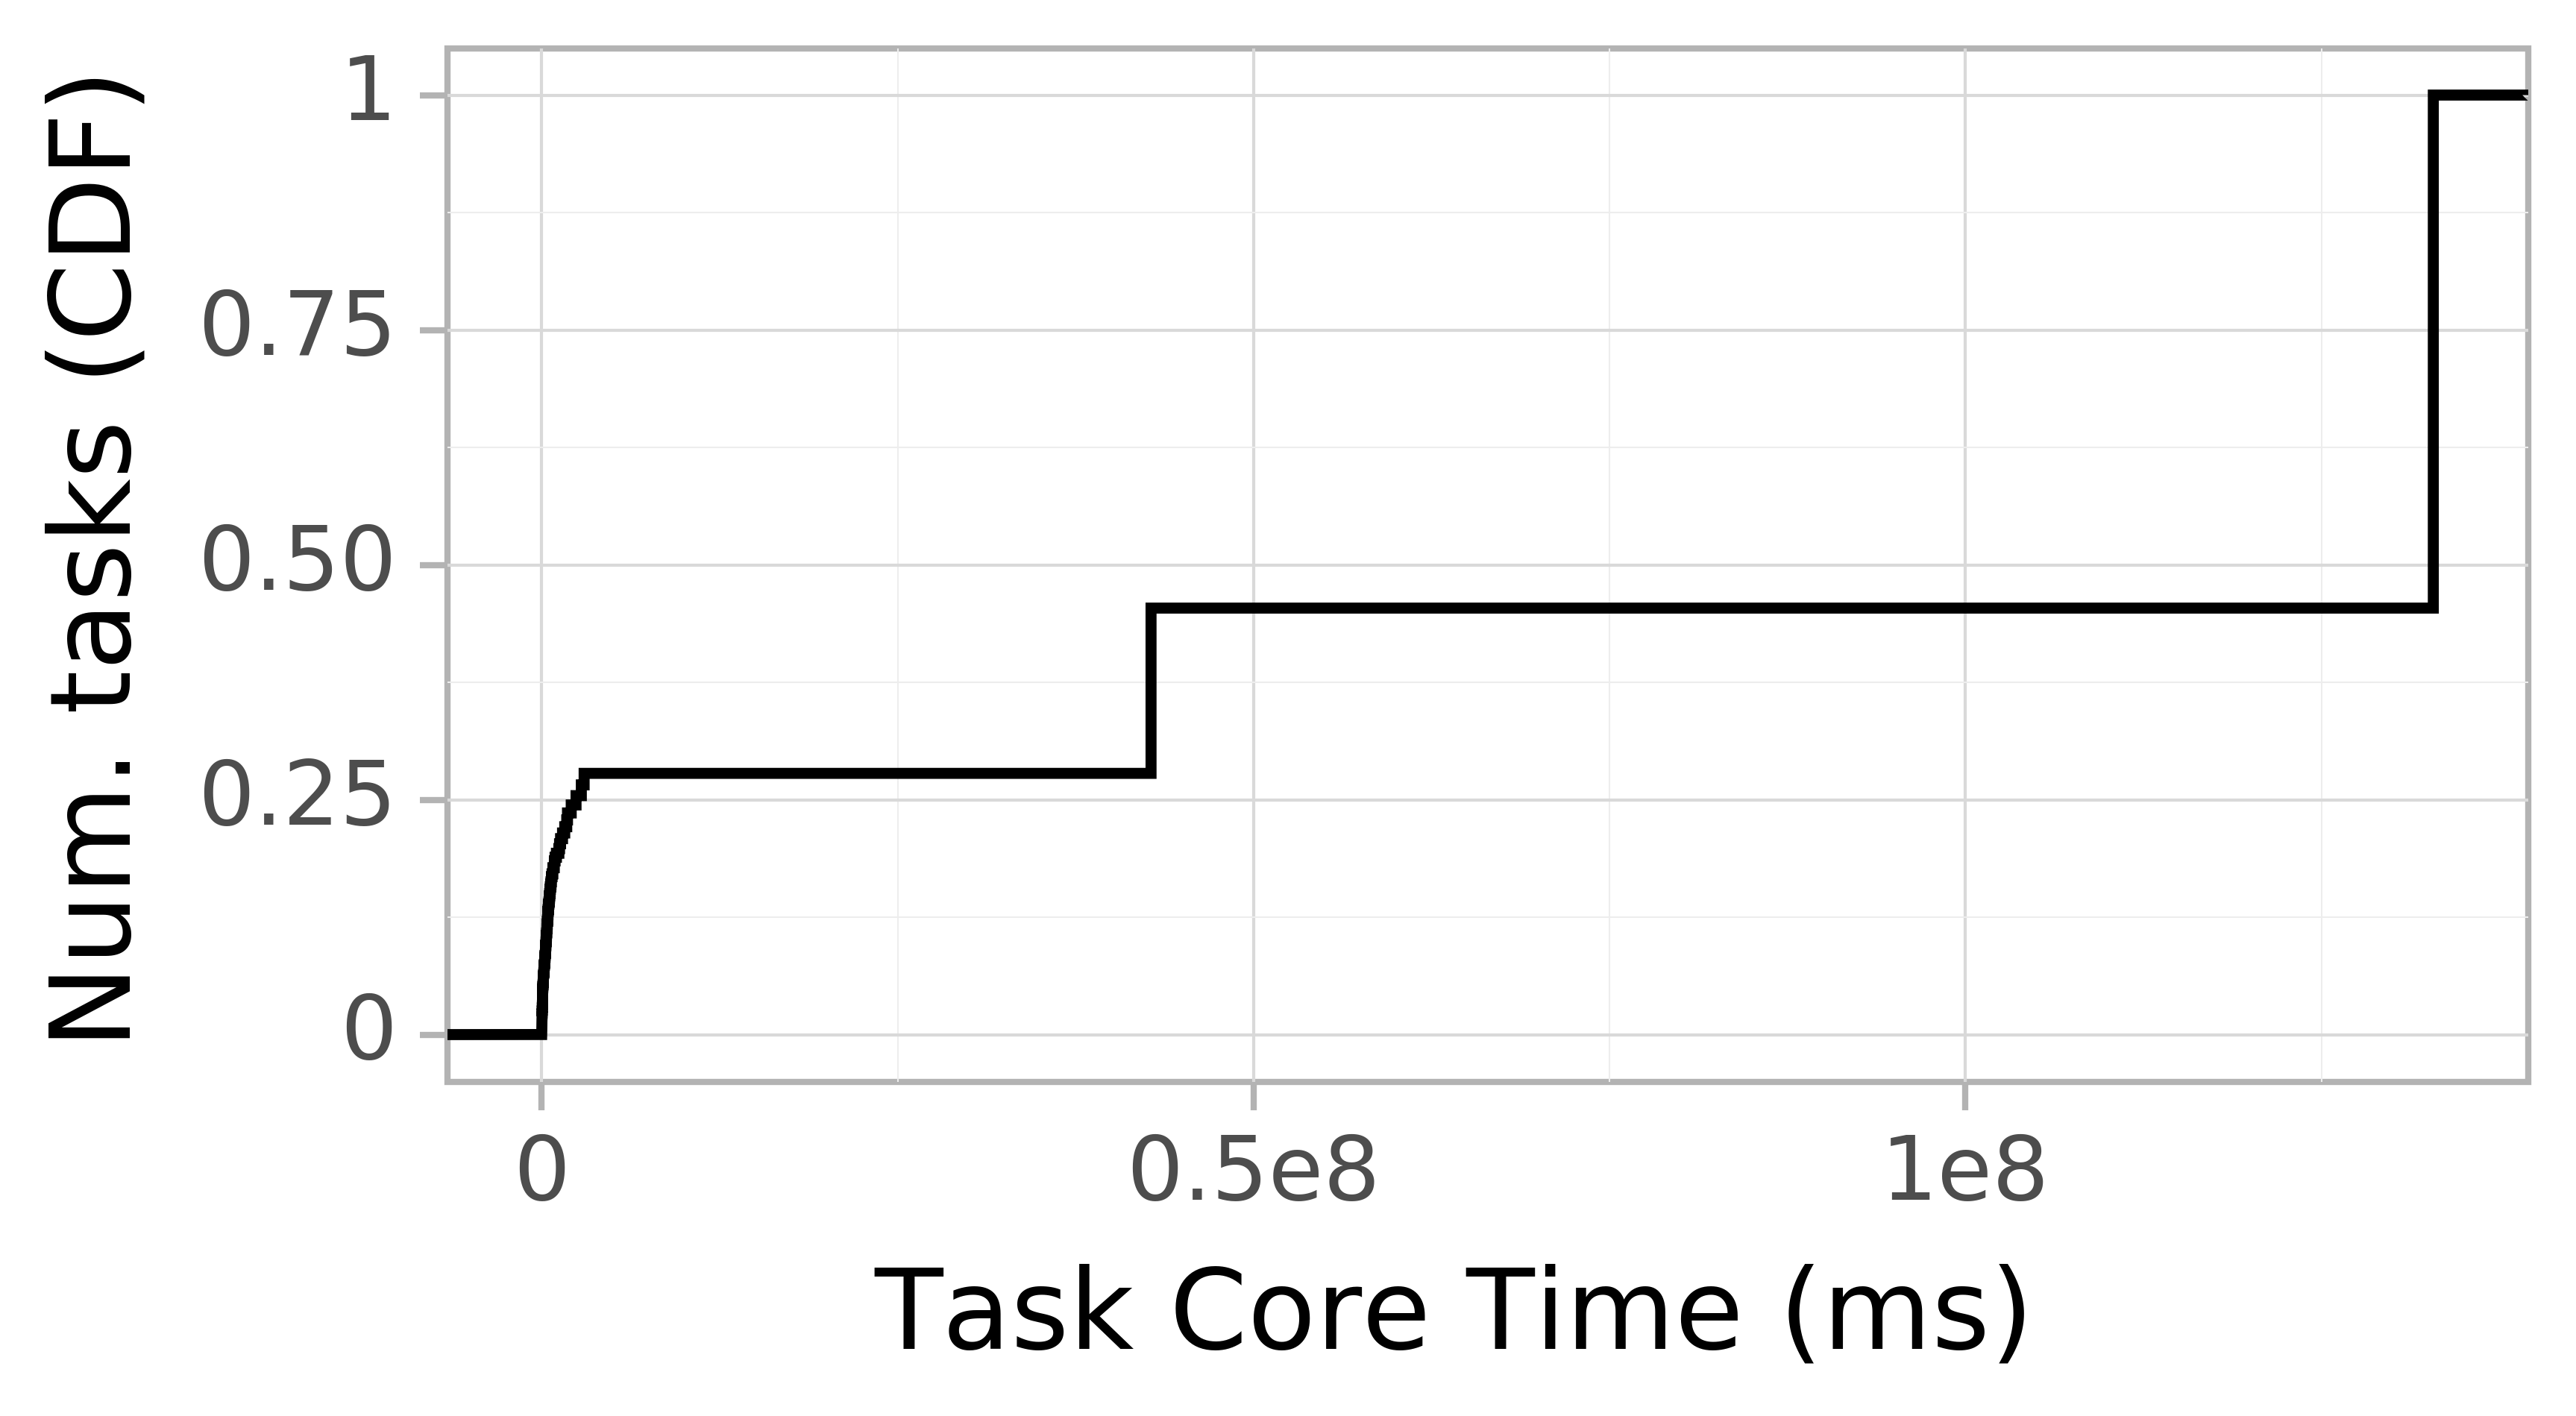 task resource time CDF graph for the Google trace.